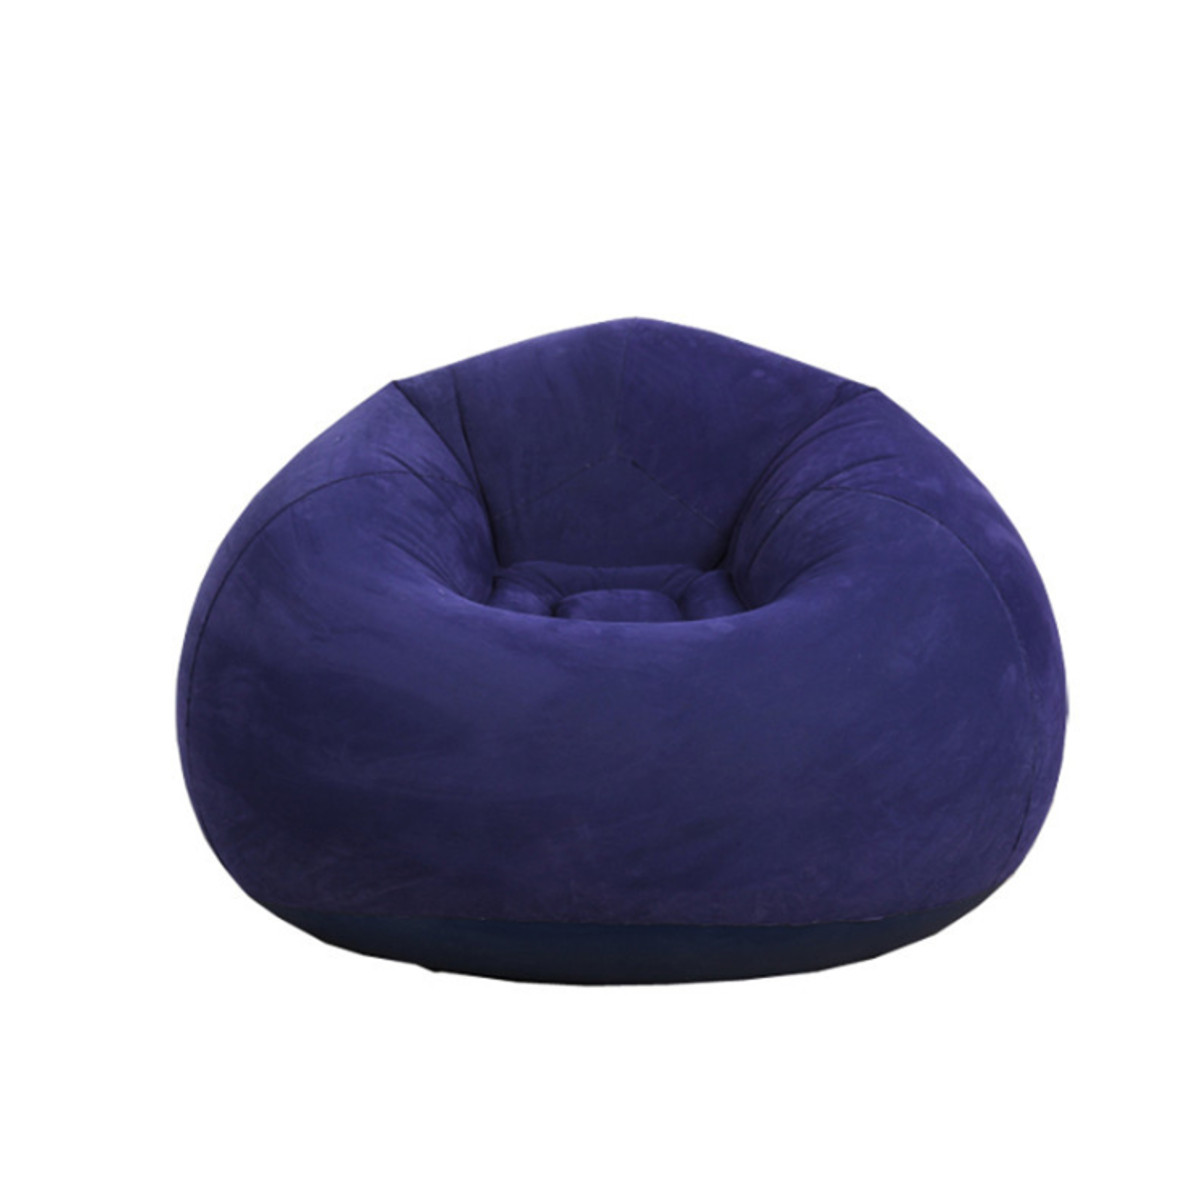 110x85cm-Large-Inflatable-Chair-Bean-Bag-PVC-IndoorOutdoor-Garden-Furniture-Lounge-Adult-Lazy-Sofa-N-1682288-10